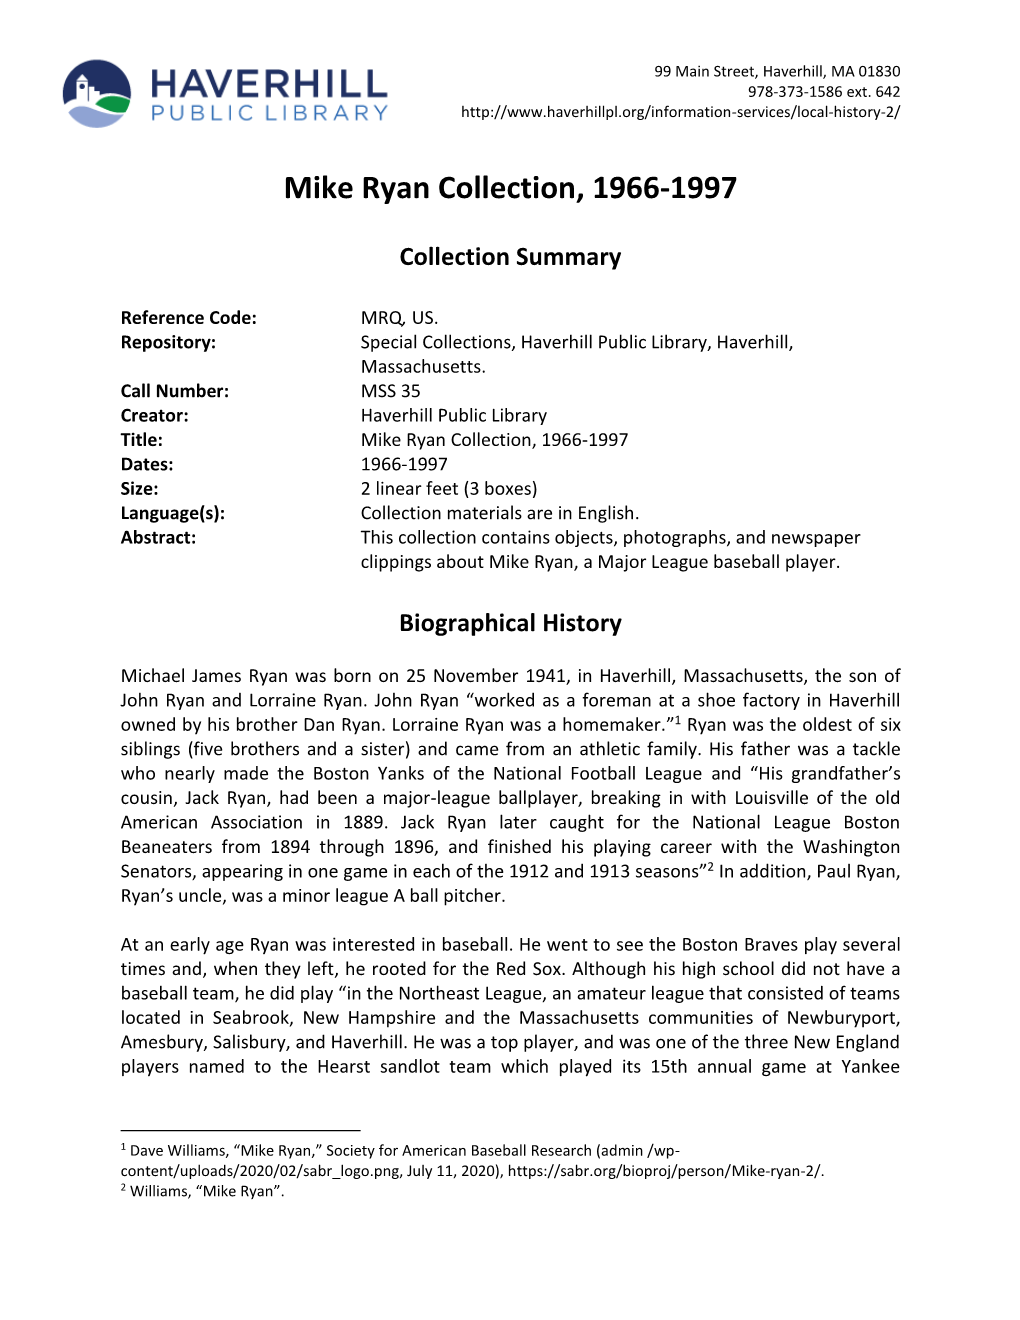 Mike Ryan Collection, 1966-1997